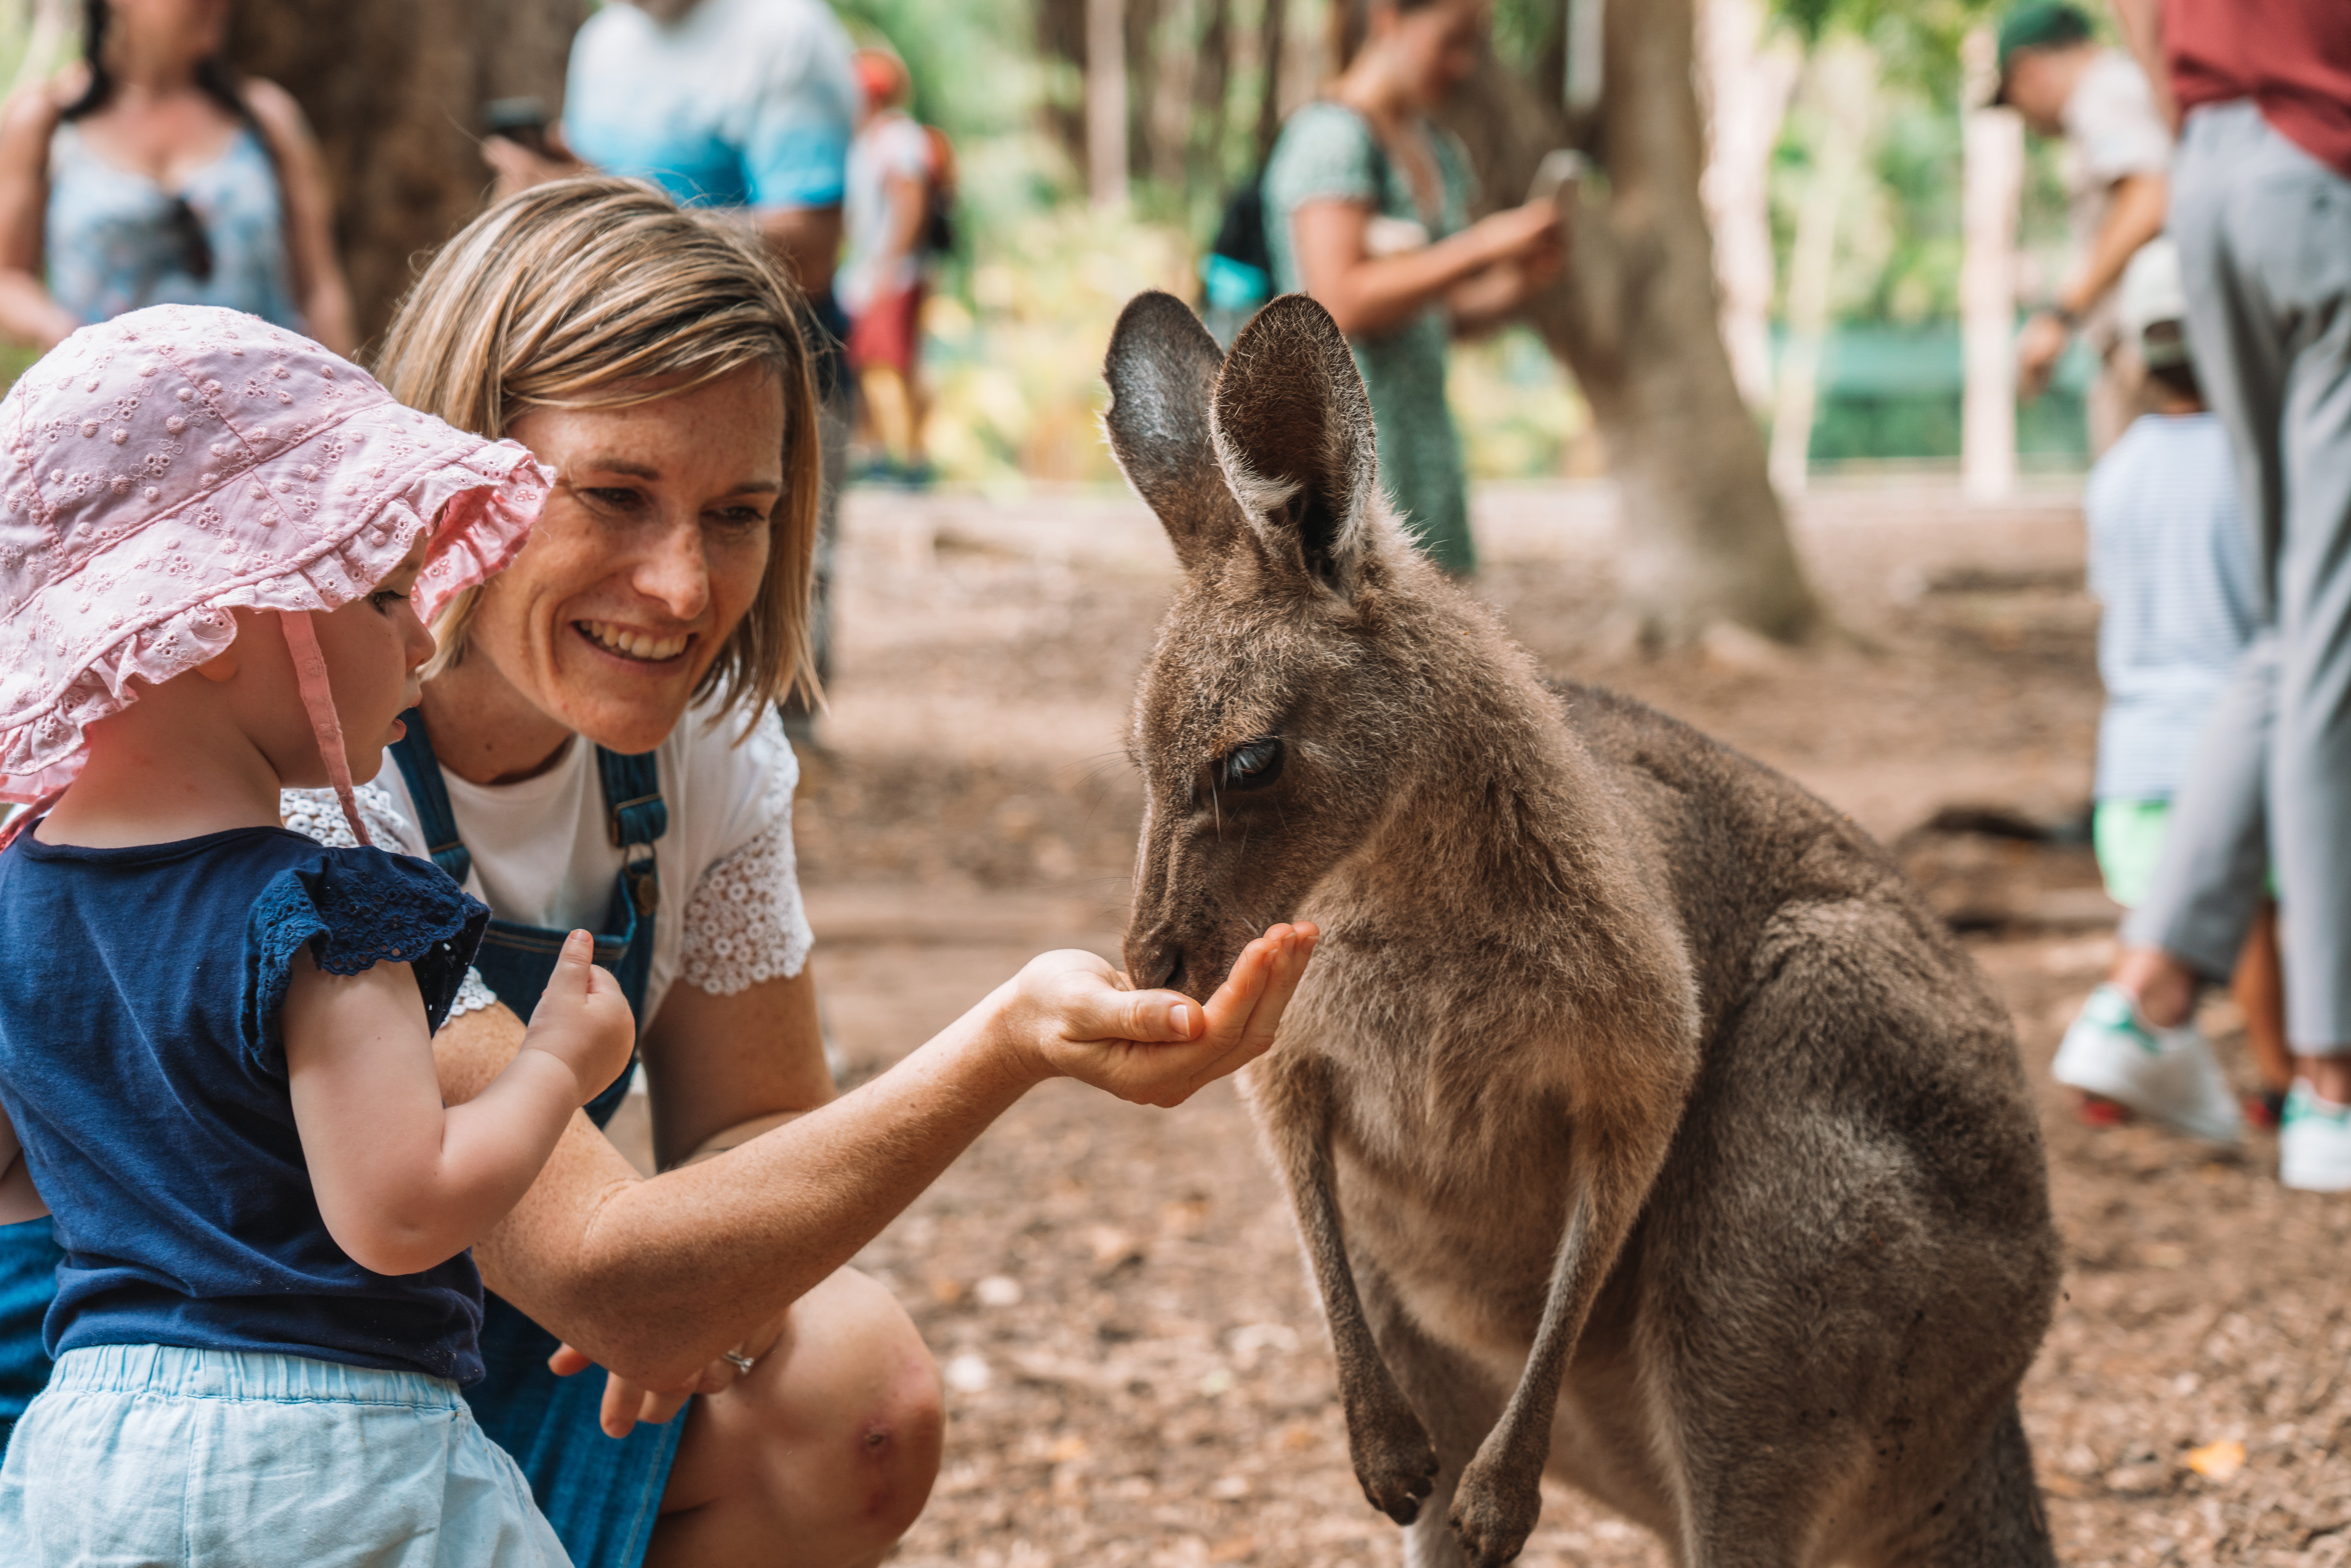 Kangaroos, koalas, crocs and quokkas can be spotted at Australia Zoo, the 1,000 acre plot founded by legend Steve Irwin